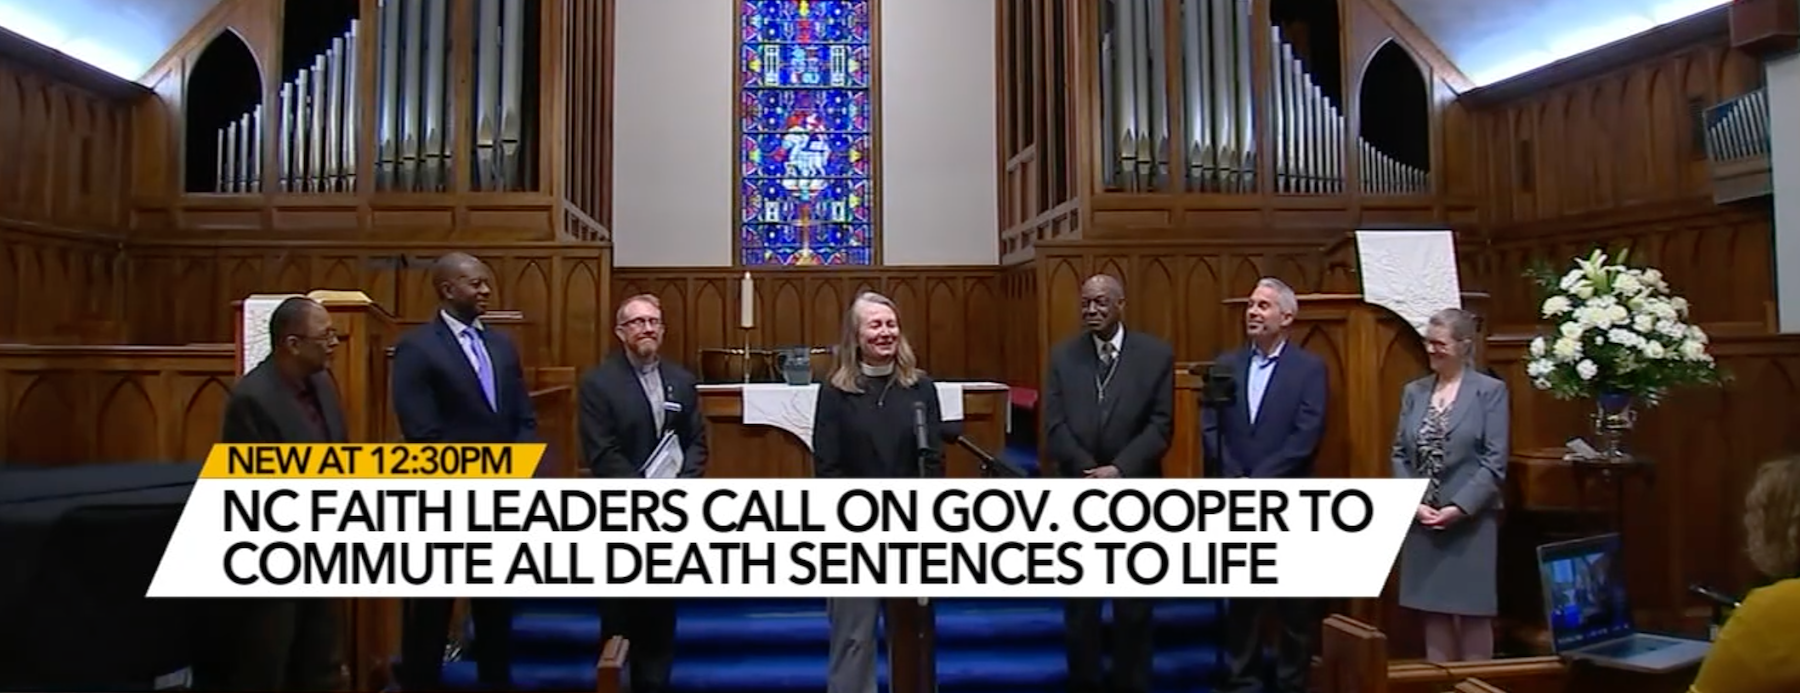 NC faith leaders ask Governor Cooper to commute sentences of death row inmates